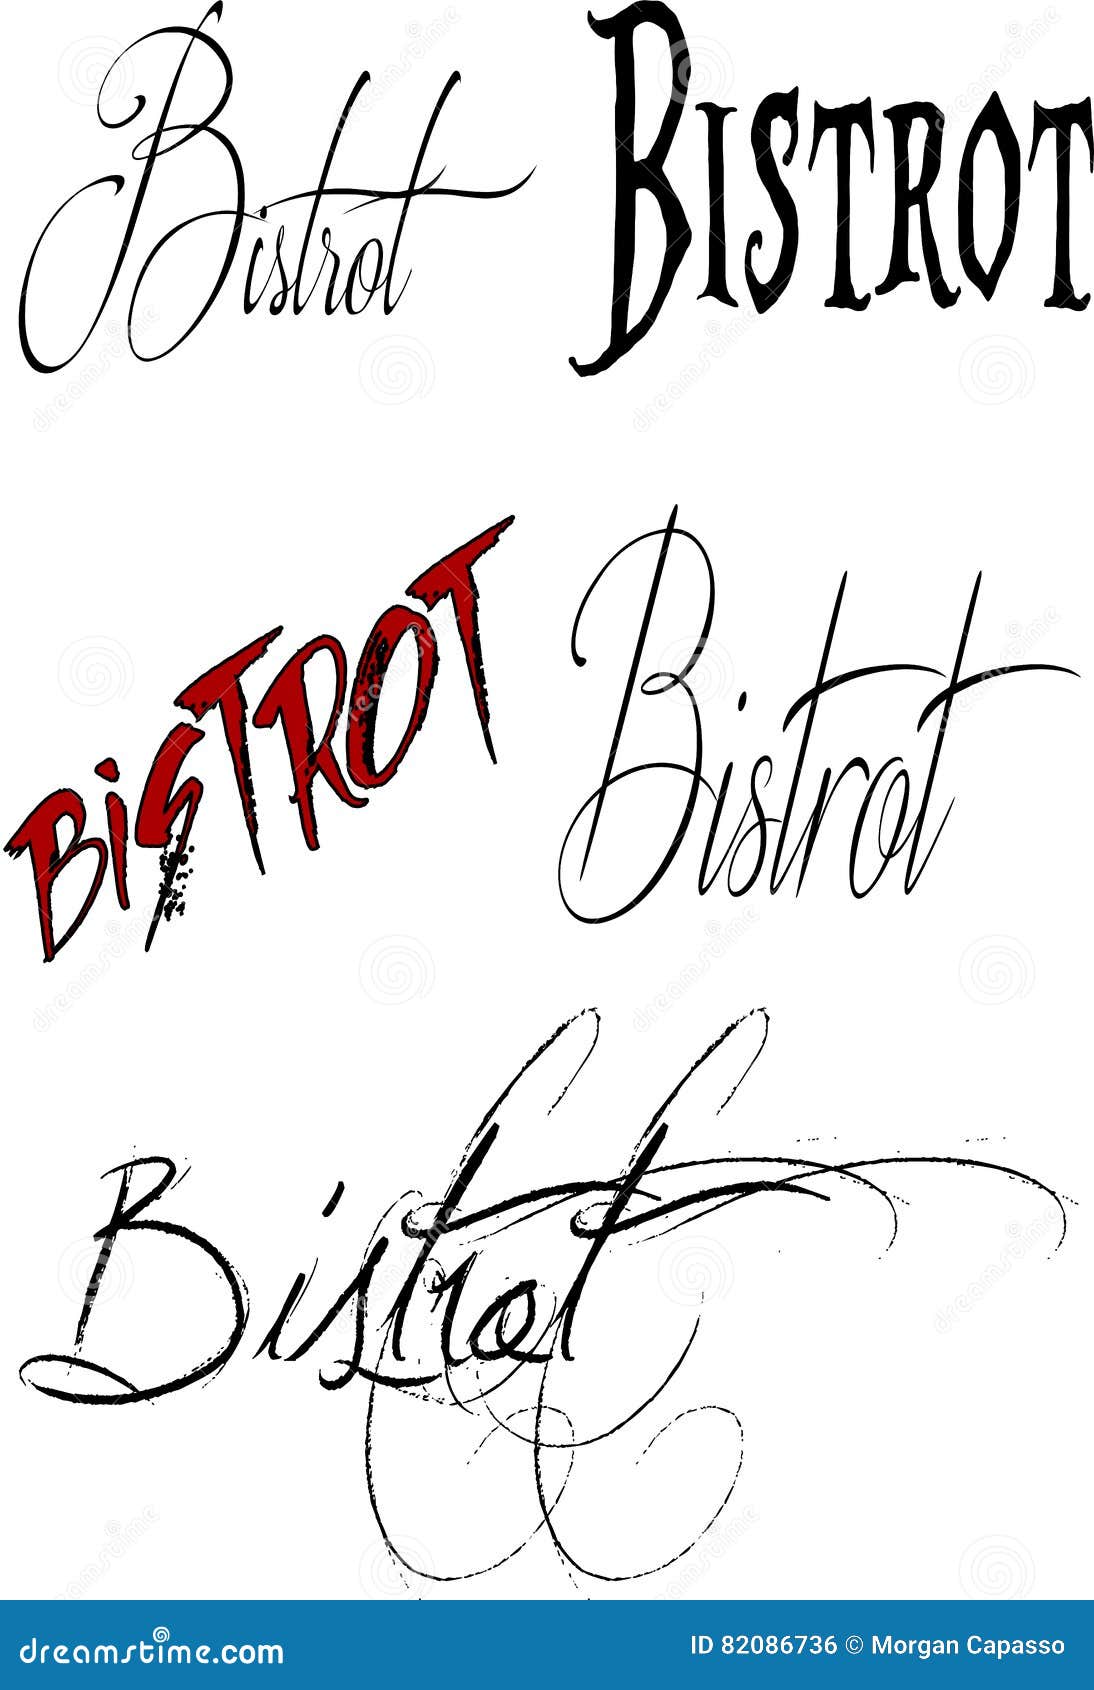 bistrot sign text